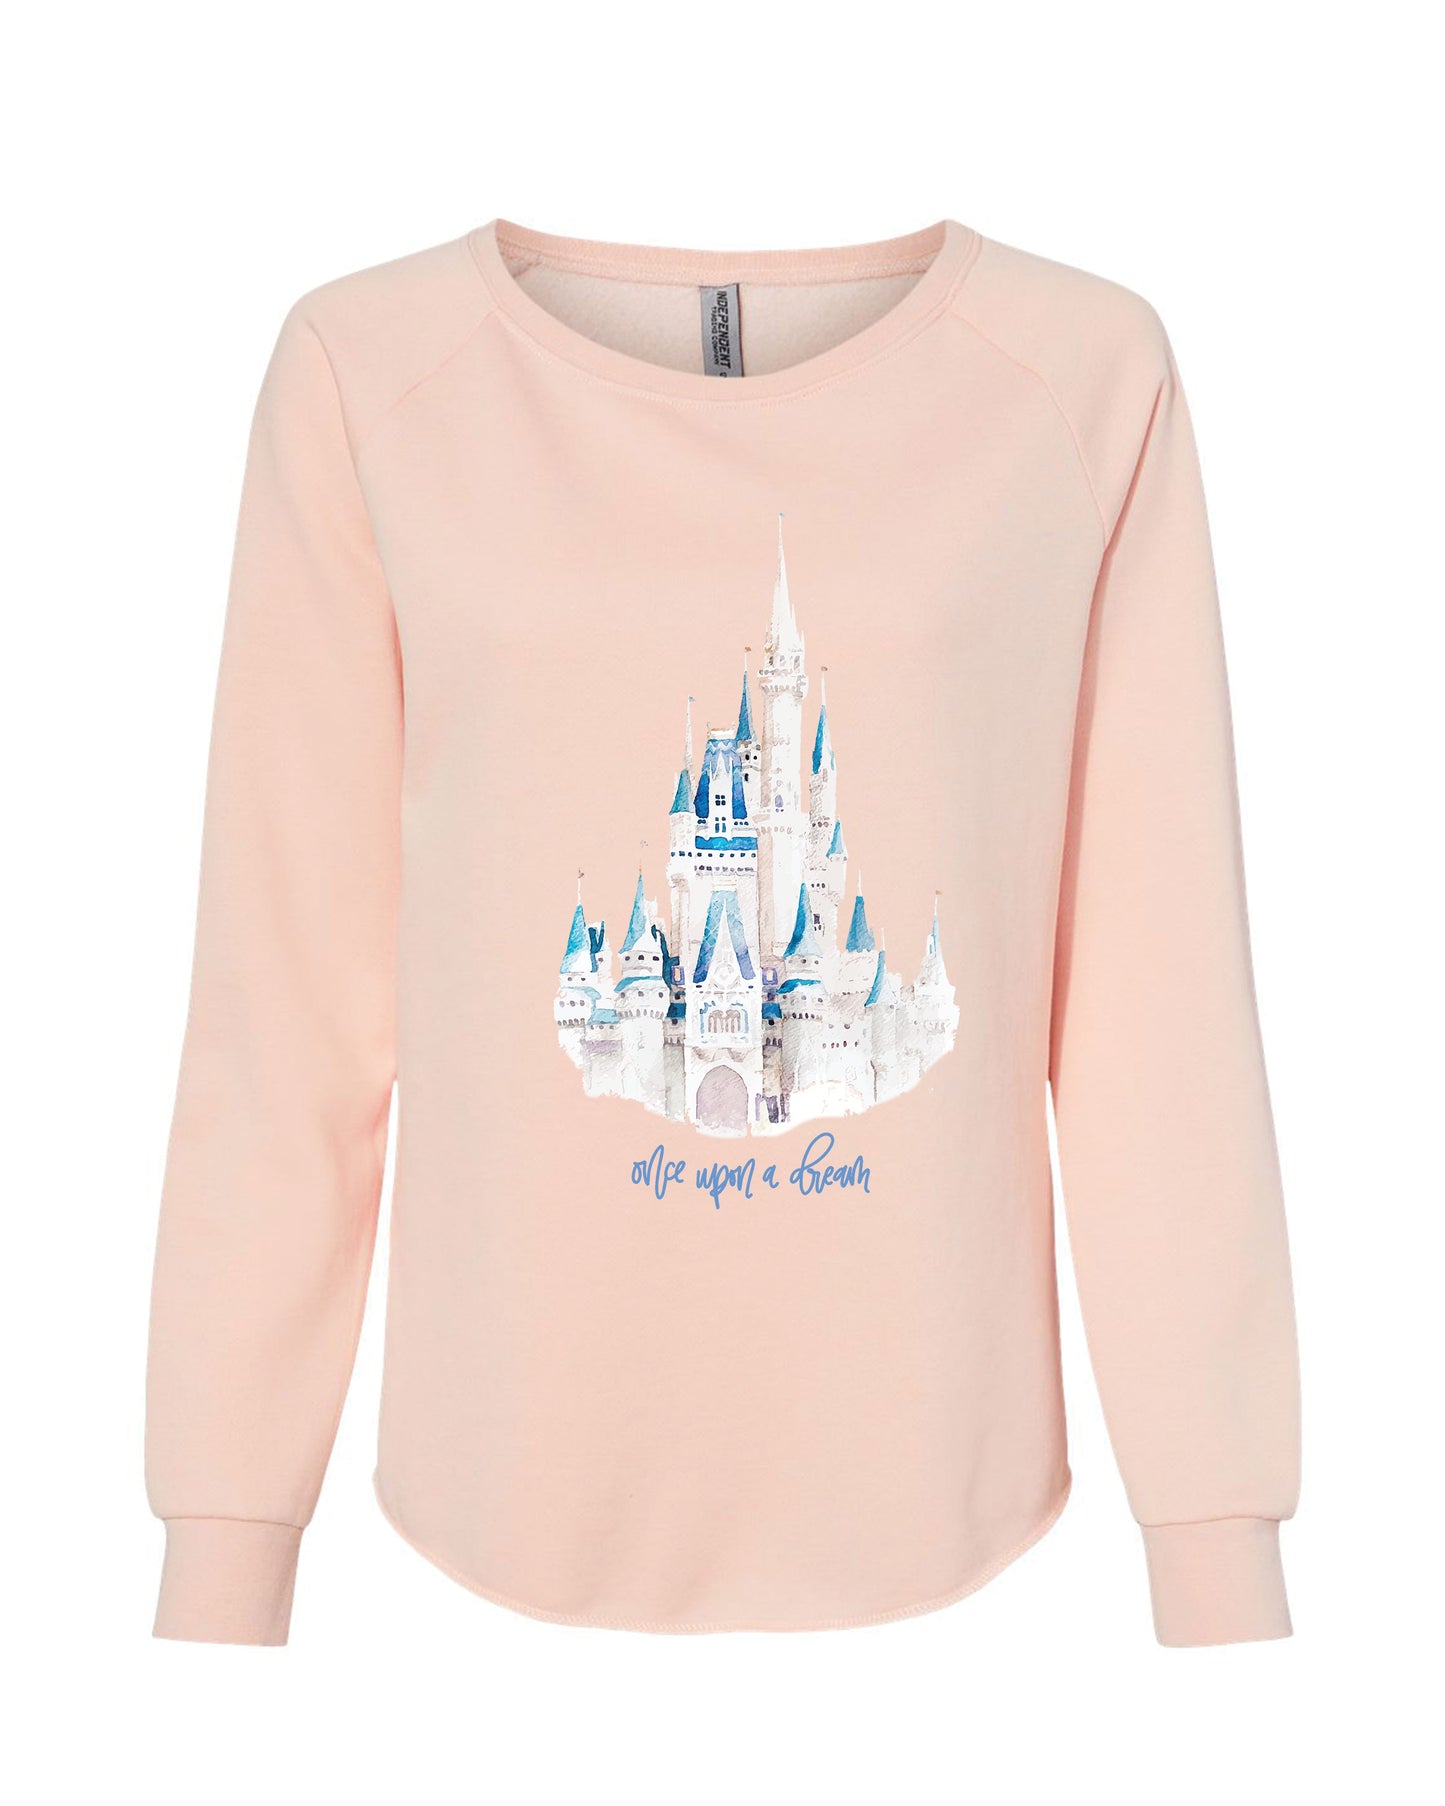 Once Upon A Dream | Pullover | Adult-Adult Crewneck-Sister Shirts-Sister Shirts, Cute & Custom Tees for Mama & Littles in Trussville, Alabama.